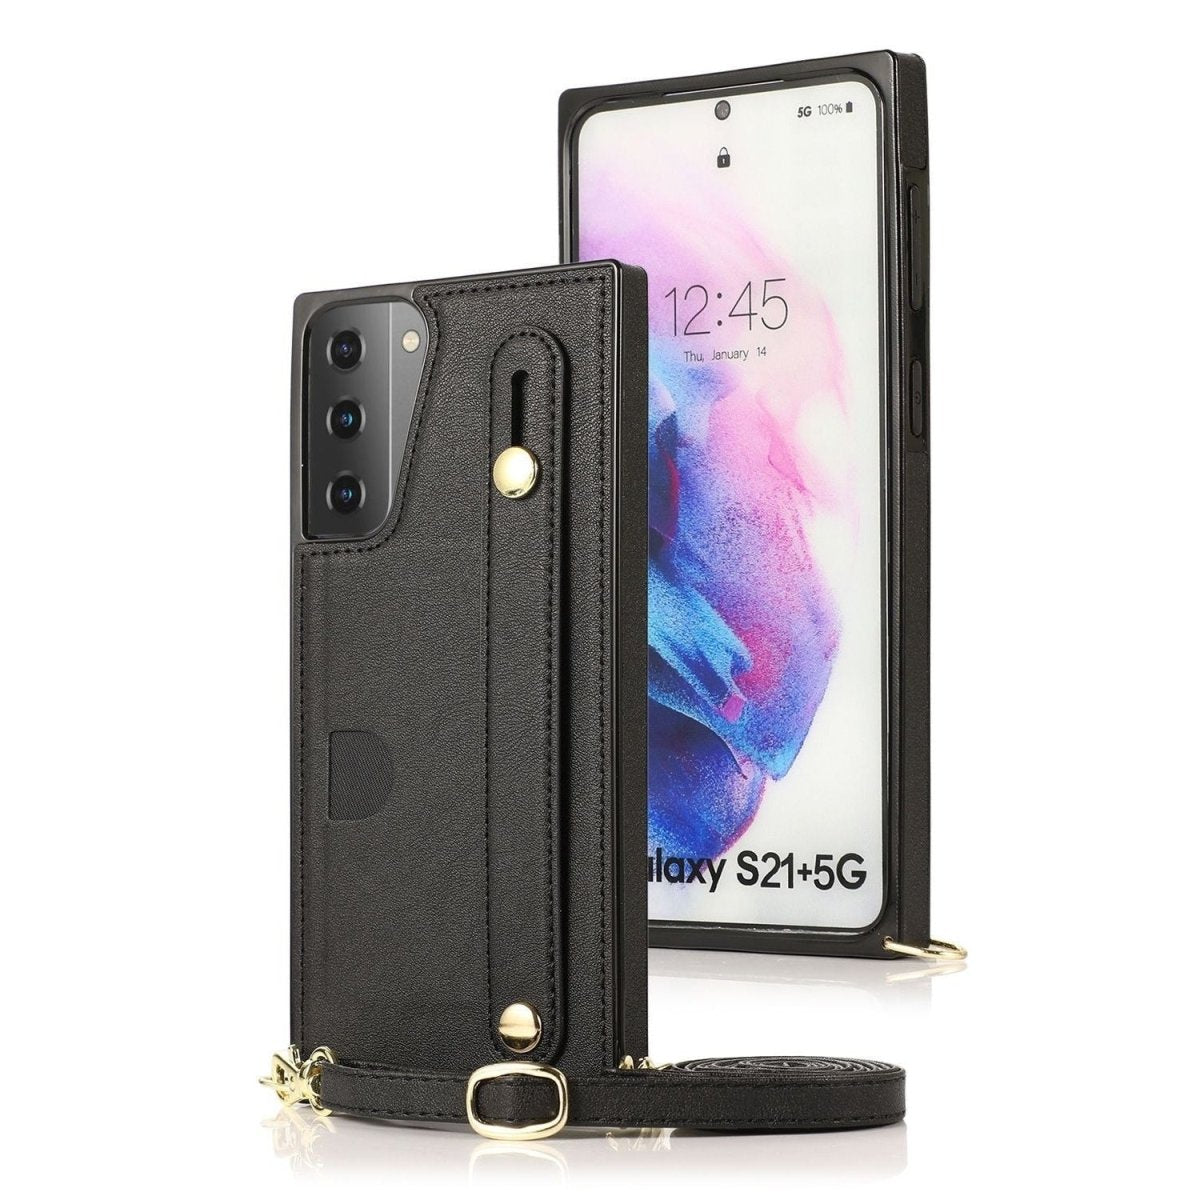 Lapis Slim Leather Galaxy Note Shockproof Case With Wrist Strap